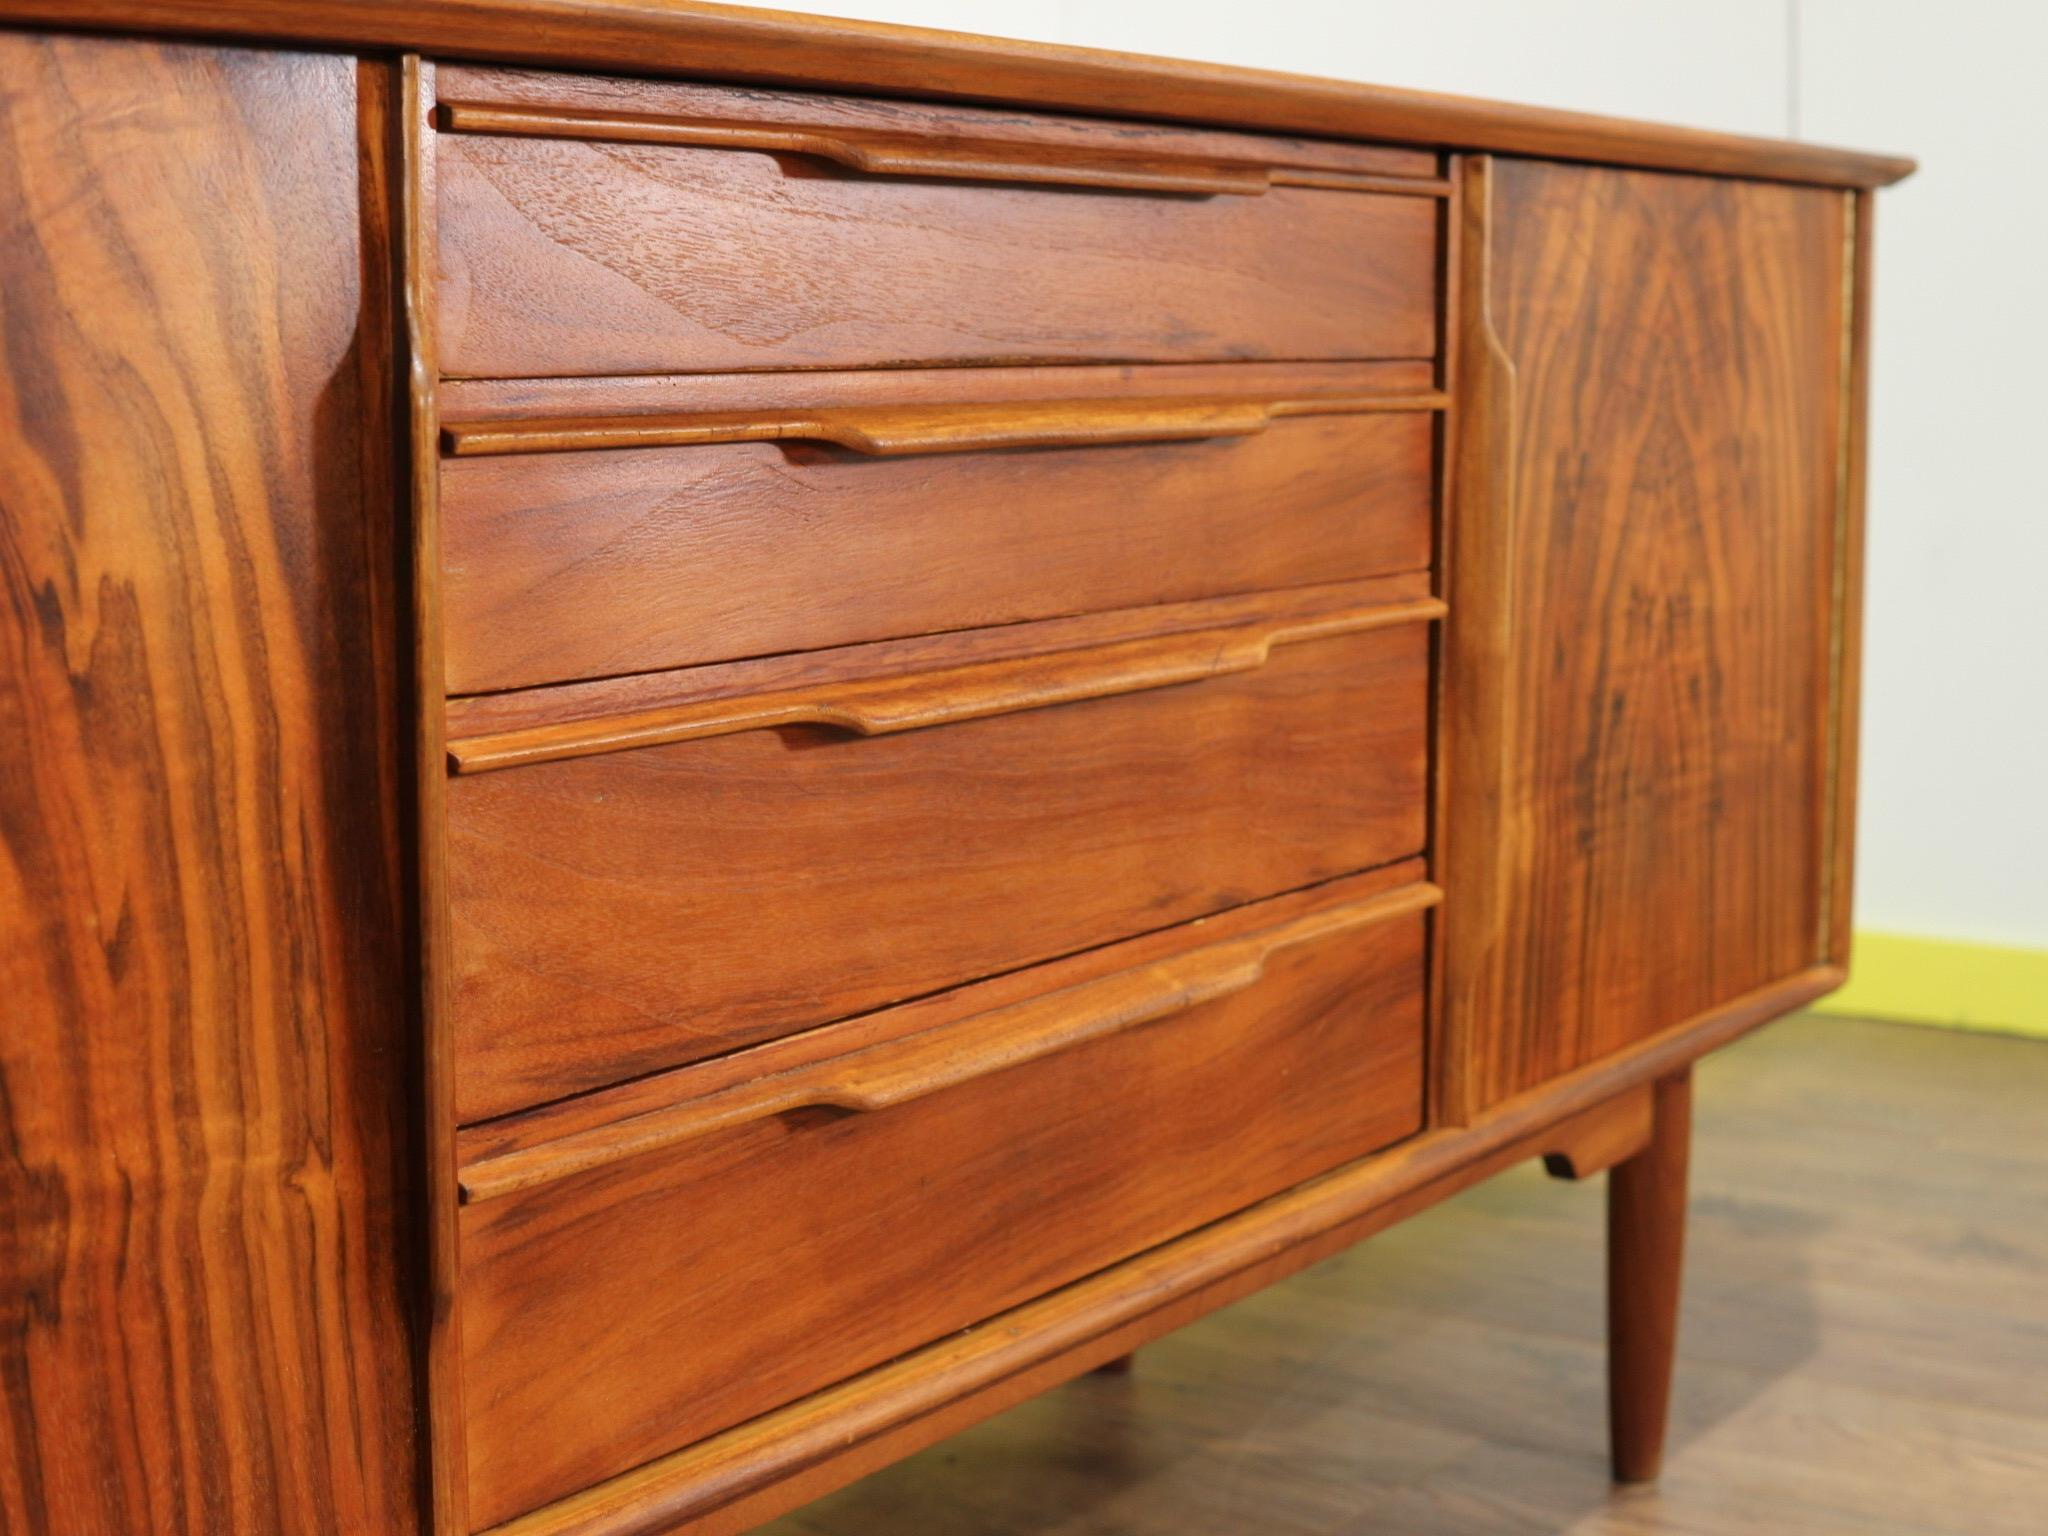 This truly stunning short credenza made by Scotish company, Morris of Glasgow is a real show stopper. The Grain of the wood really does make it stand out from the crowd. With plenty of storage while being compact it would looke great in any home.